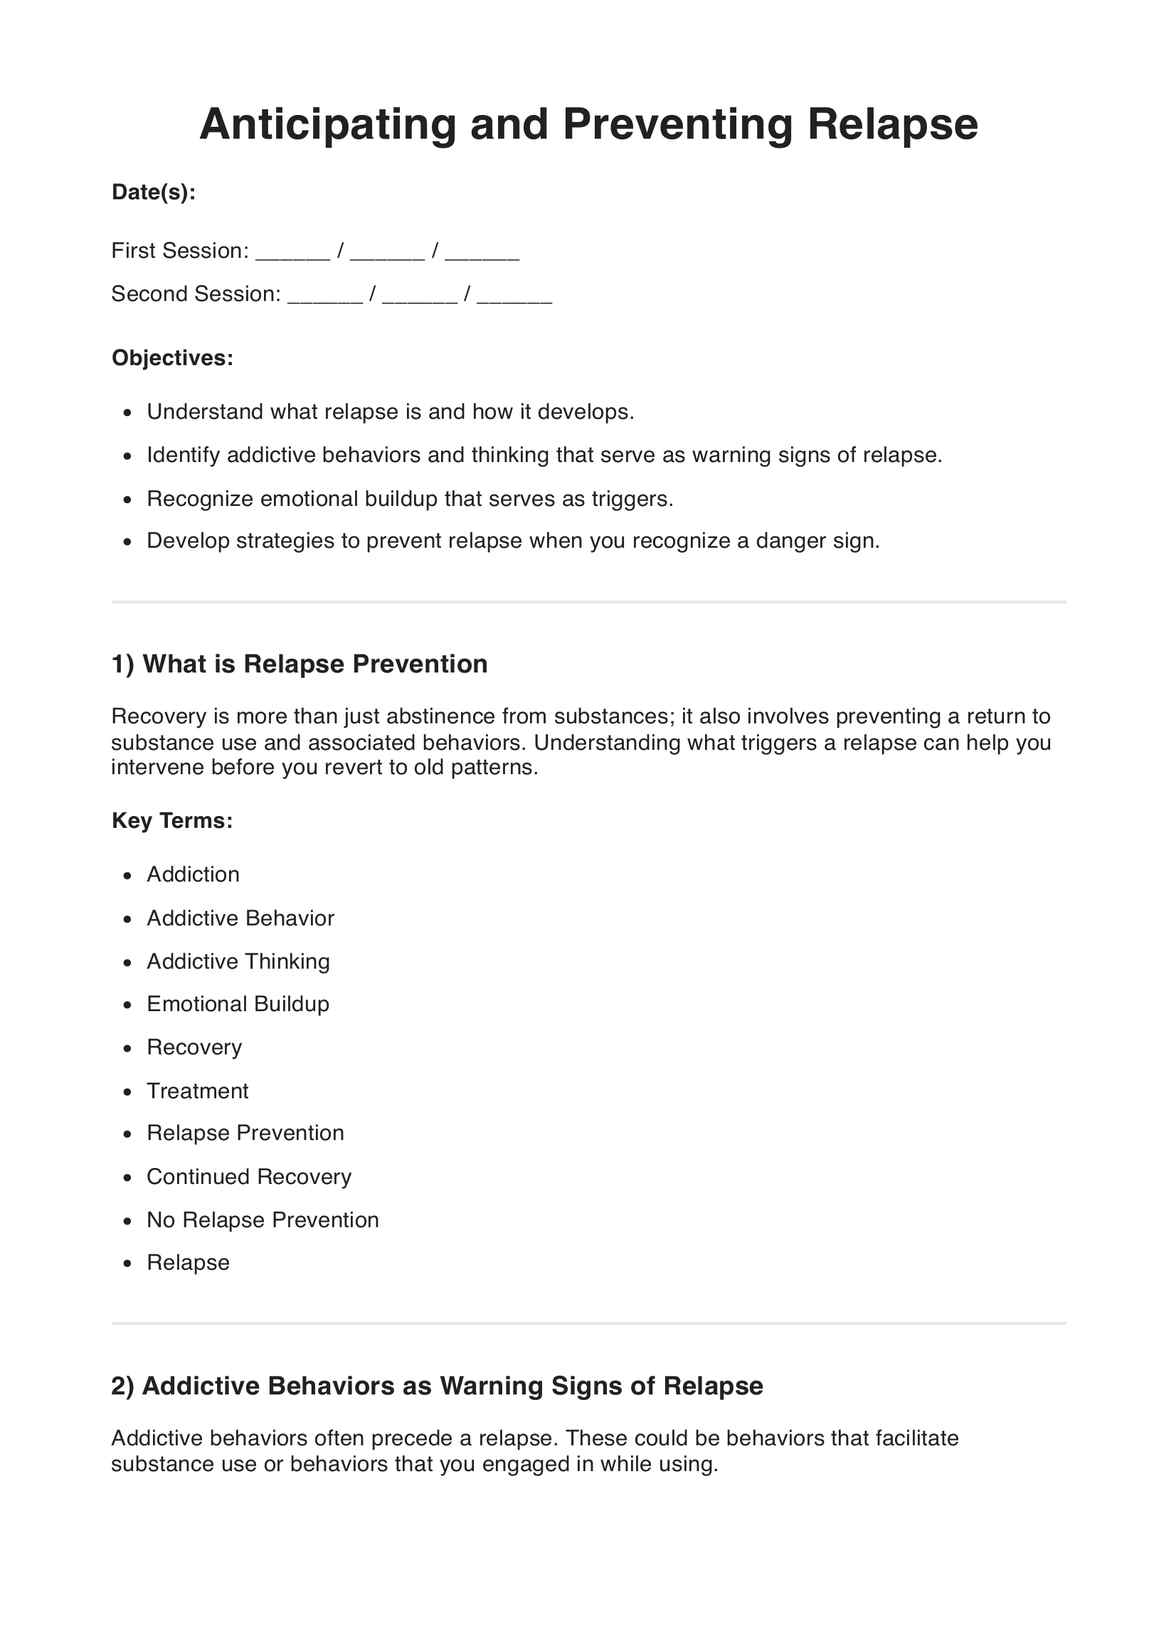 Anticipating and Preventing Relapse CBT Worksheets PDF Example